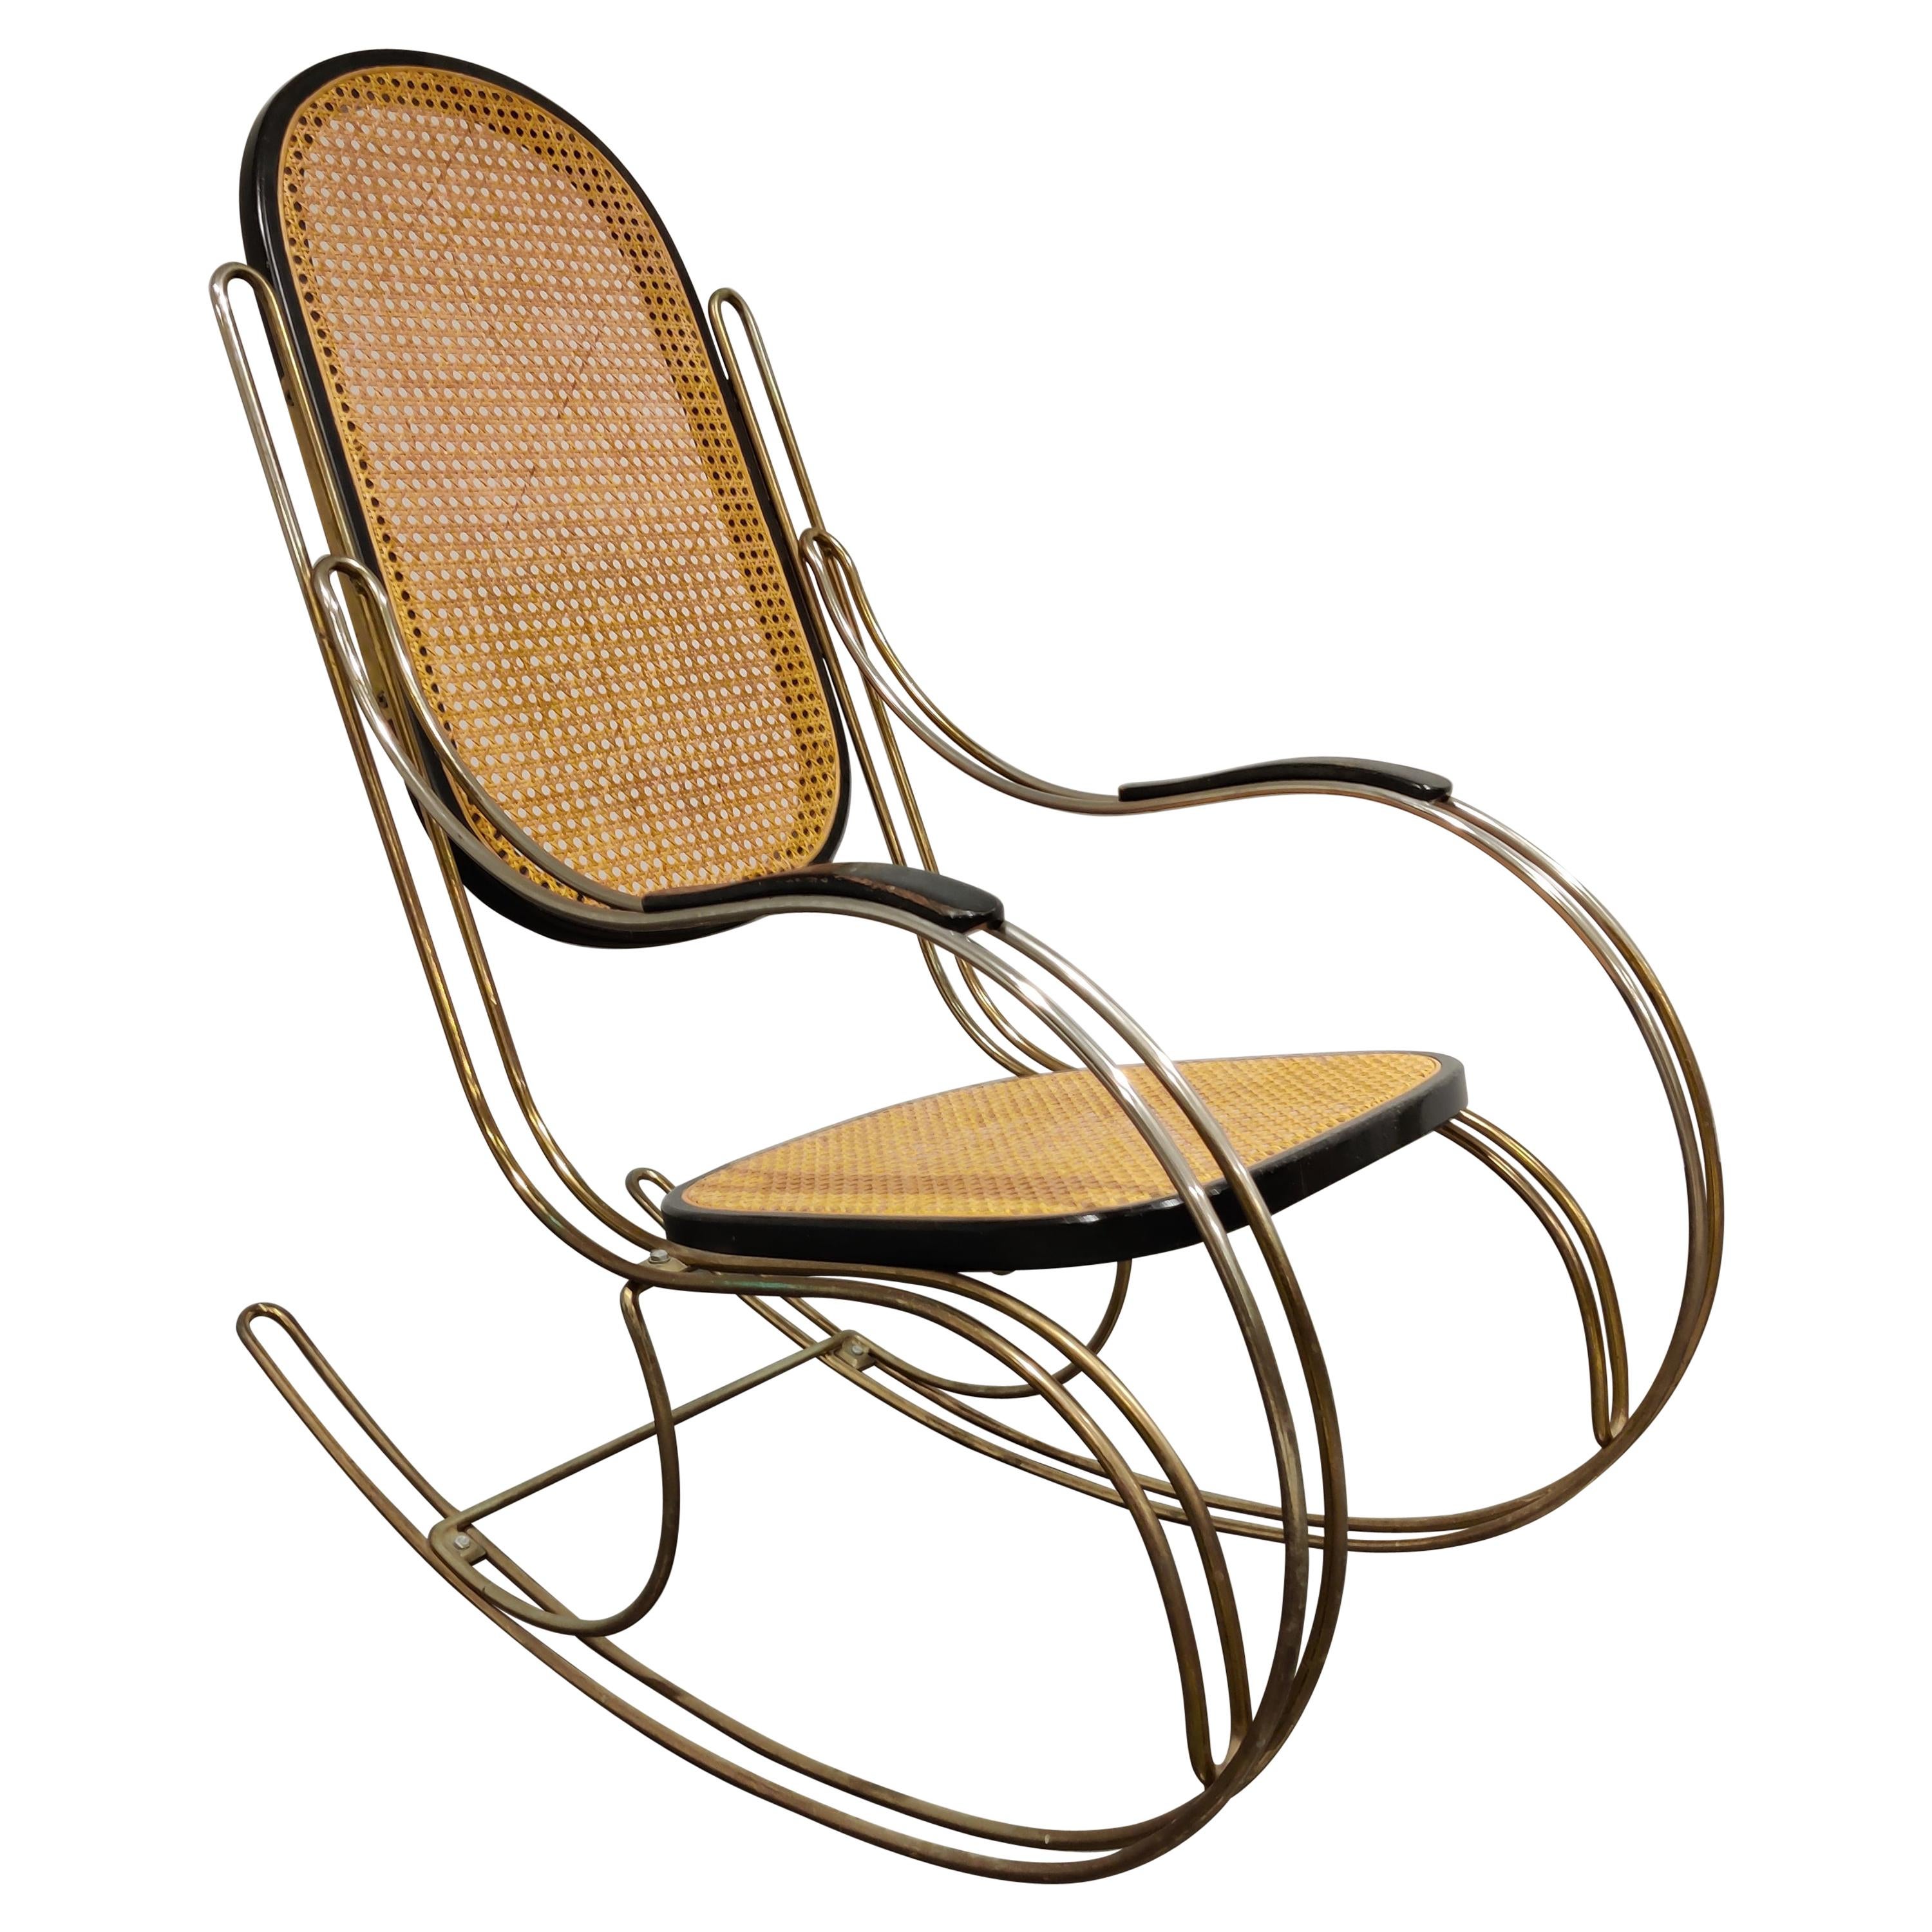 Vintage Chrome and Rattan Rocking Chair, 1960s